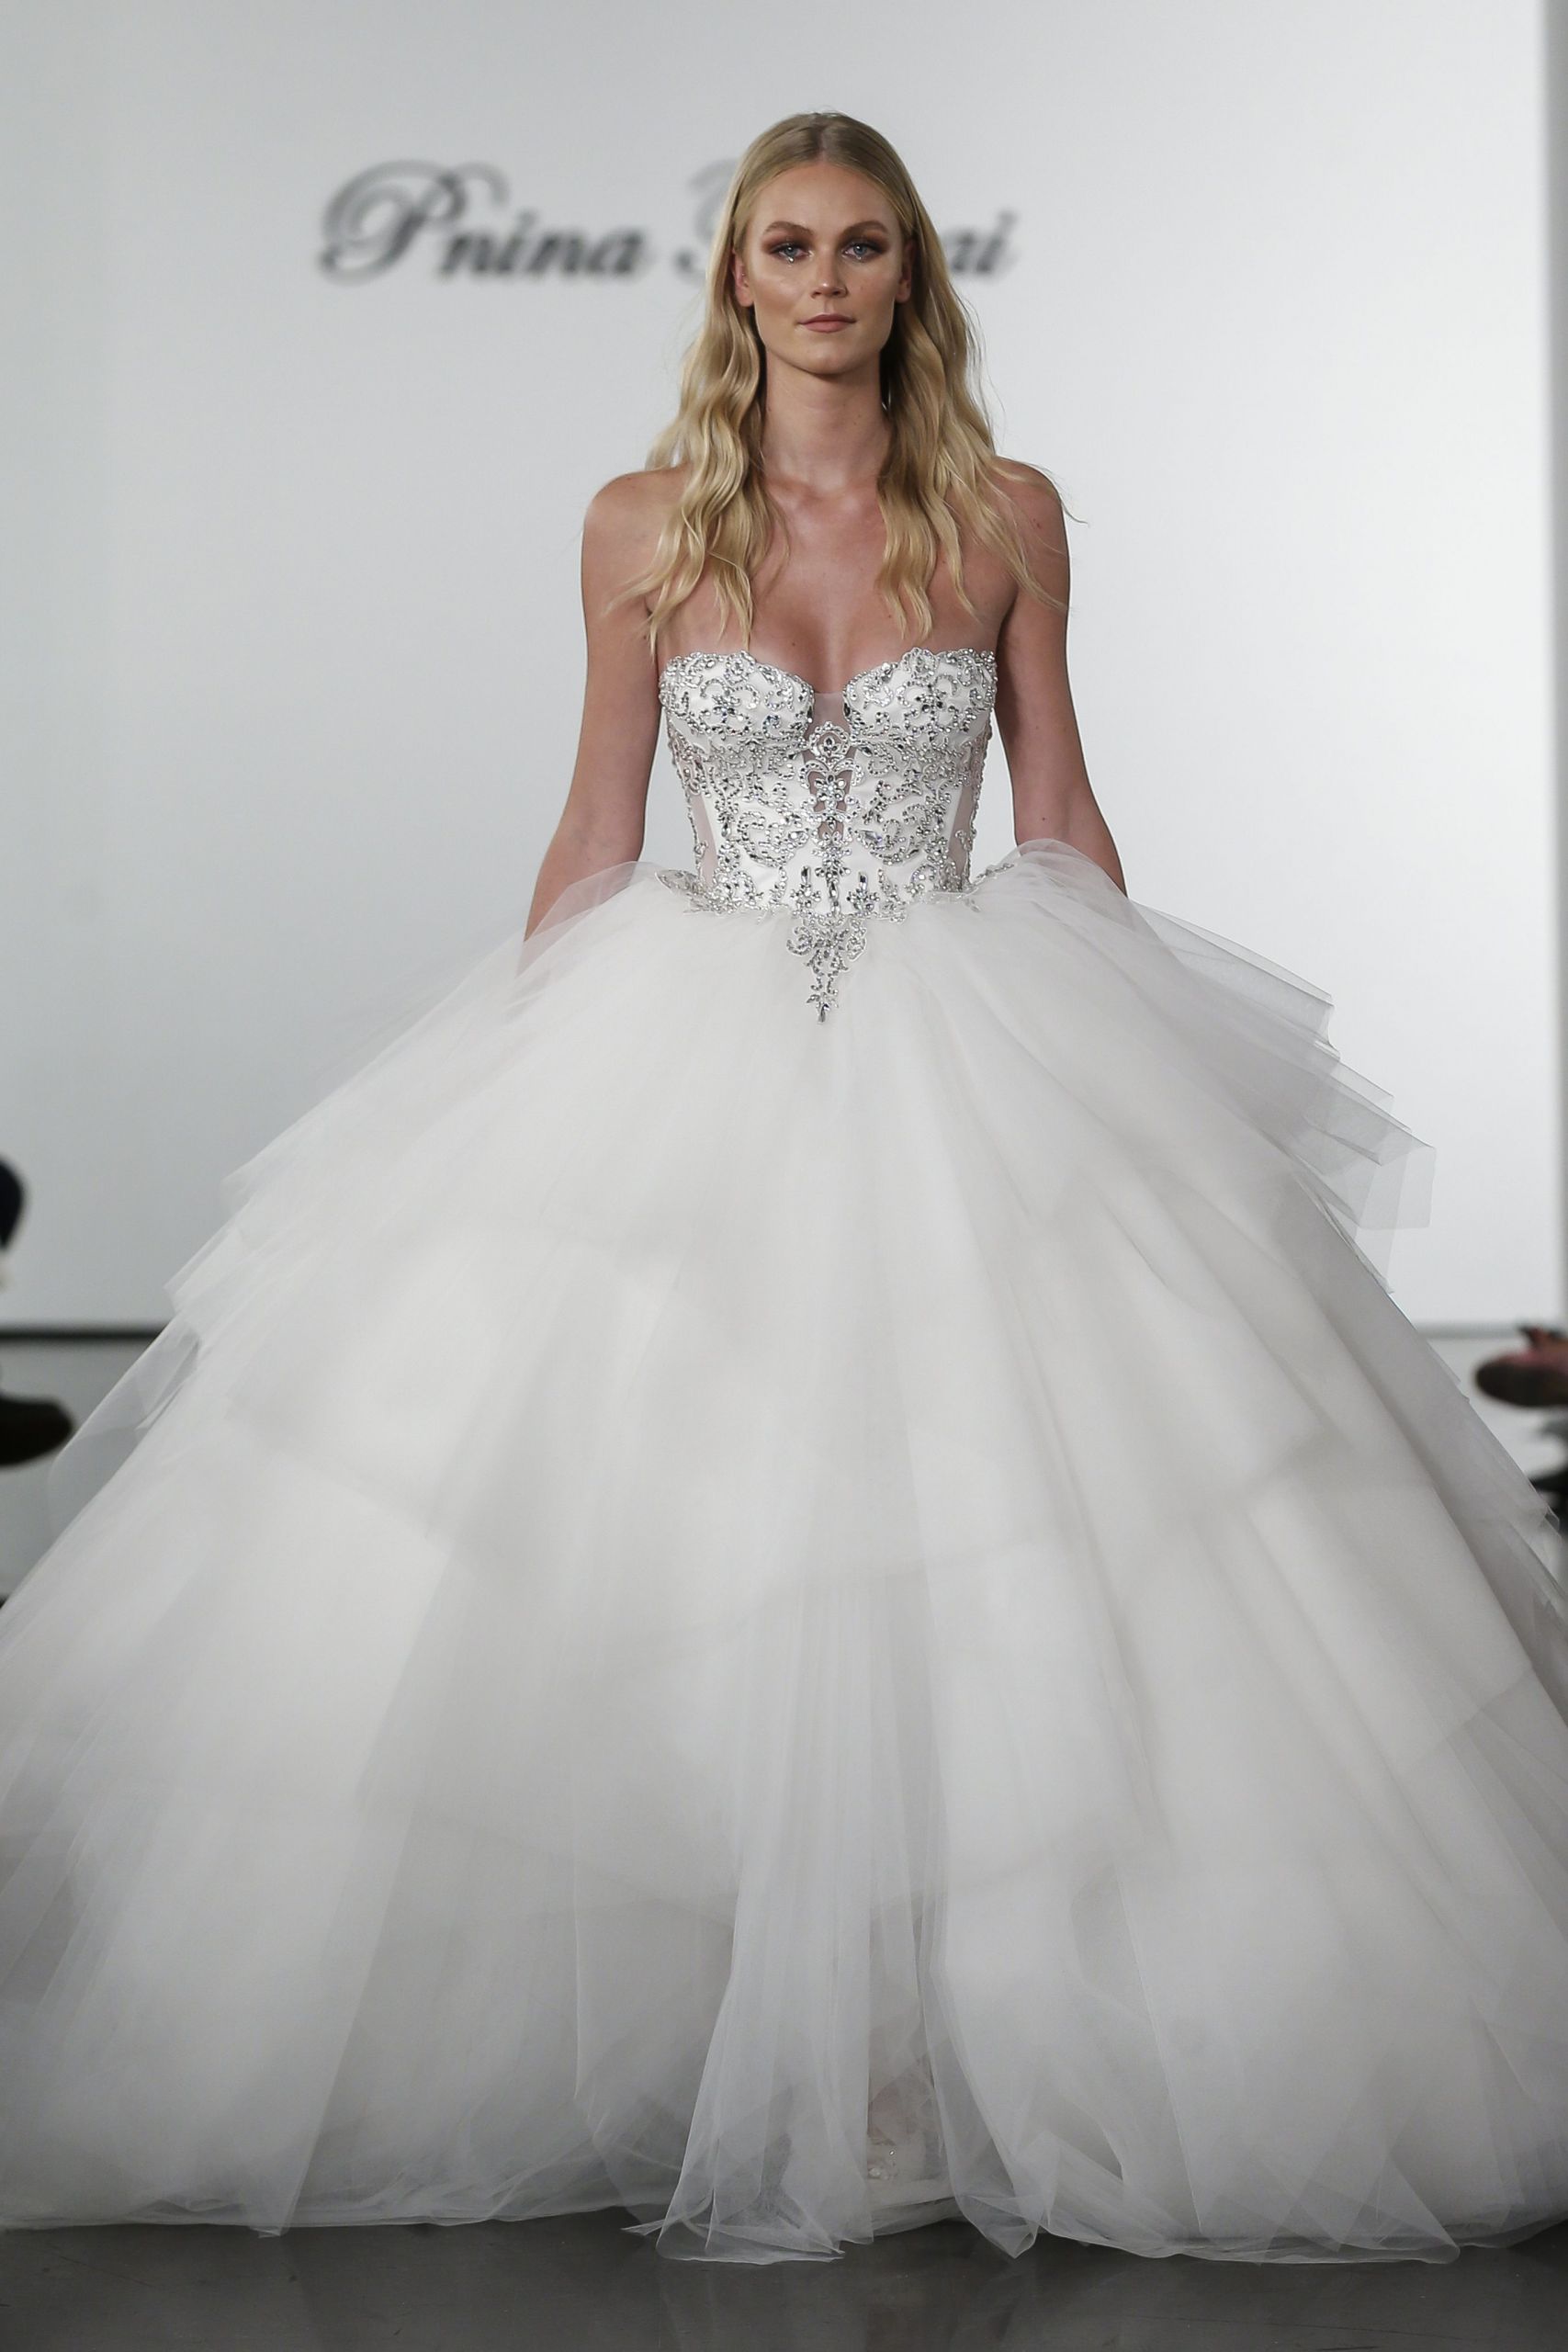 Tulle Ball Gown Wedding Dress
 Layered Tulle Ball Gown Wedding Dress With Crystal